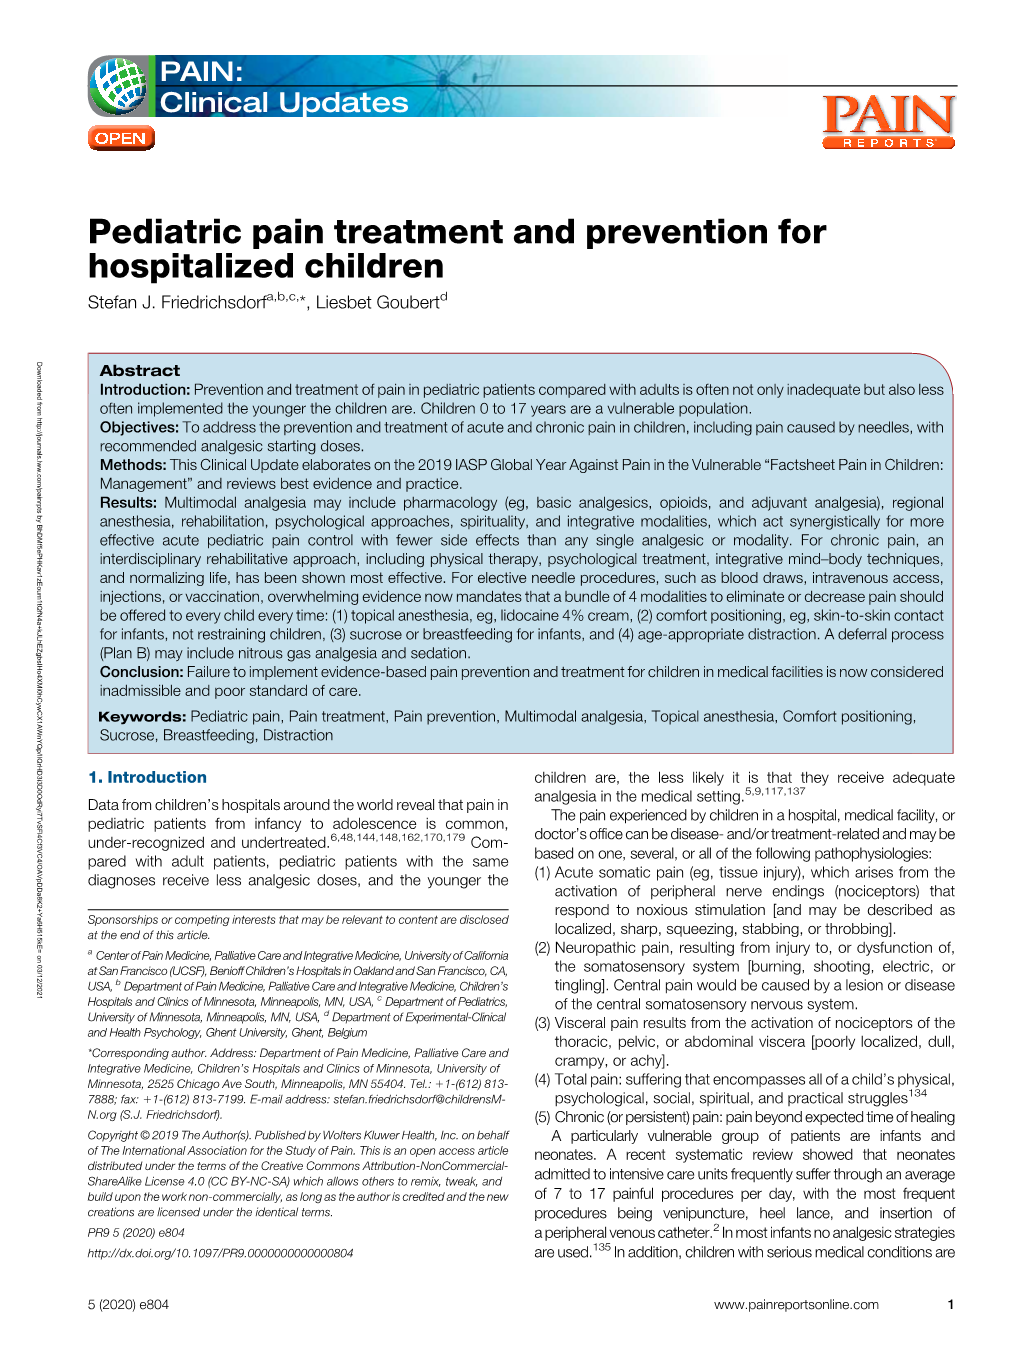 Pediatric Pain Treatment and Prevention for Hospitalized Children